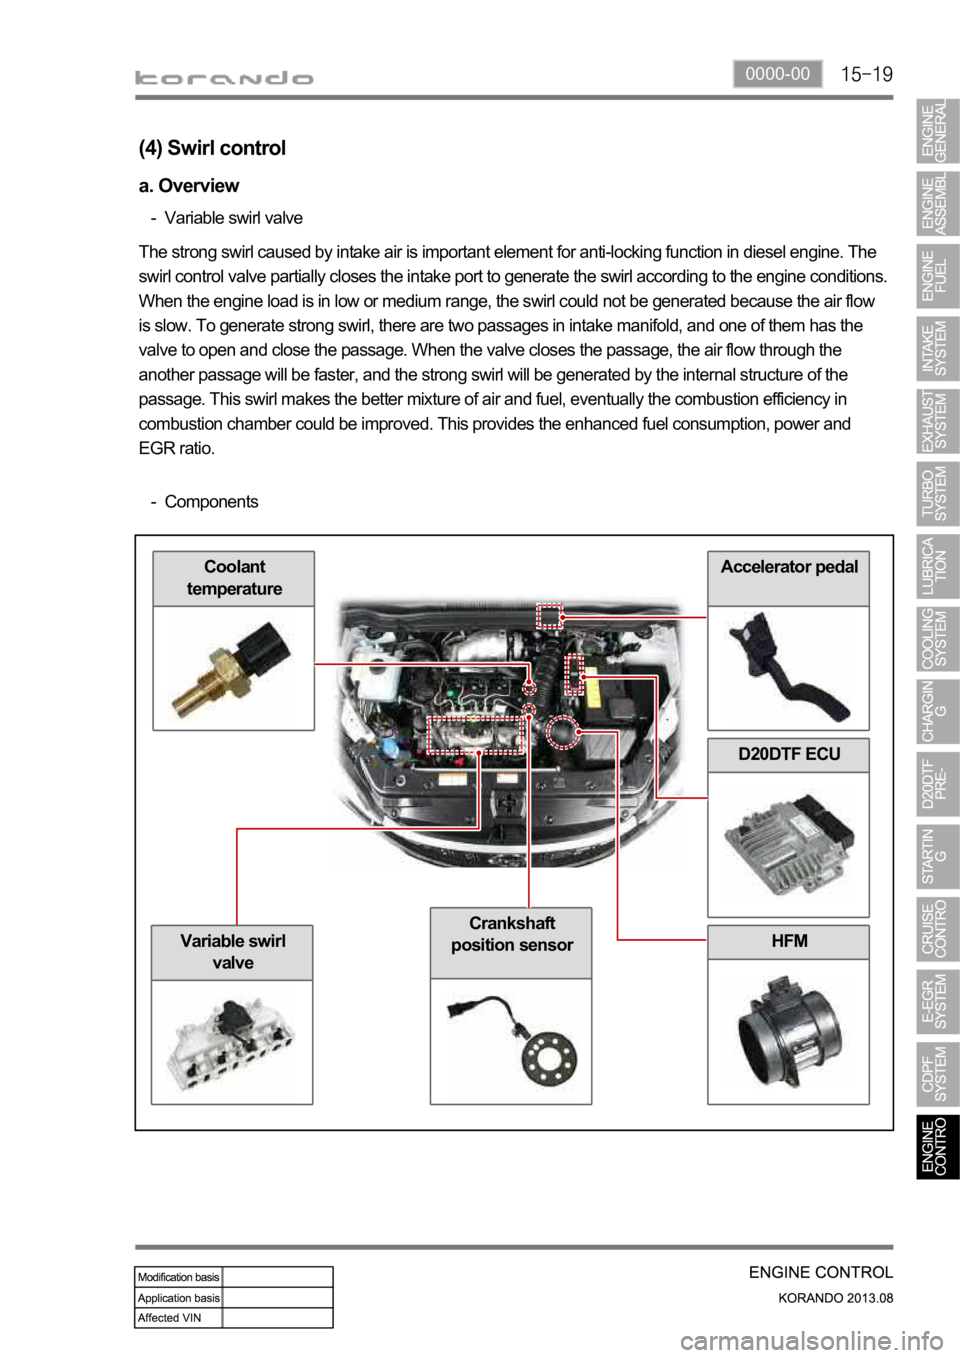 SSANGYONG KORANDO 2013 Owners Manual 0000-00
HFM
Accelerator pedalCoolant 
temperature
(4) Swirl control
a. Overview
Variable swirl valve -
The strong swirl caused by intake air is important element for anti-locking function in diesel en